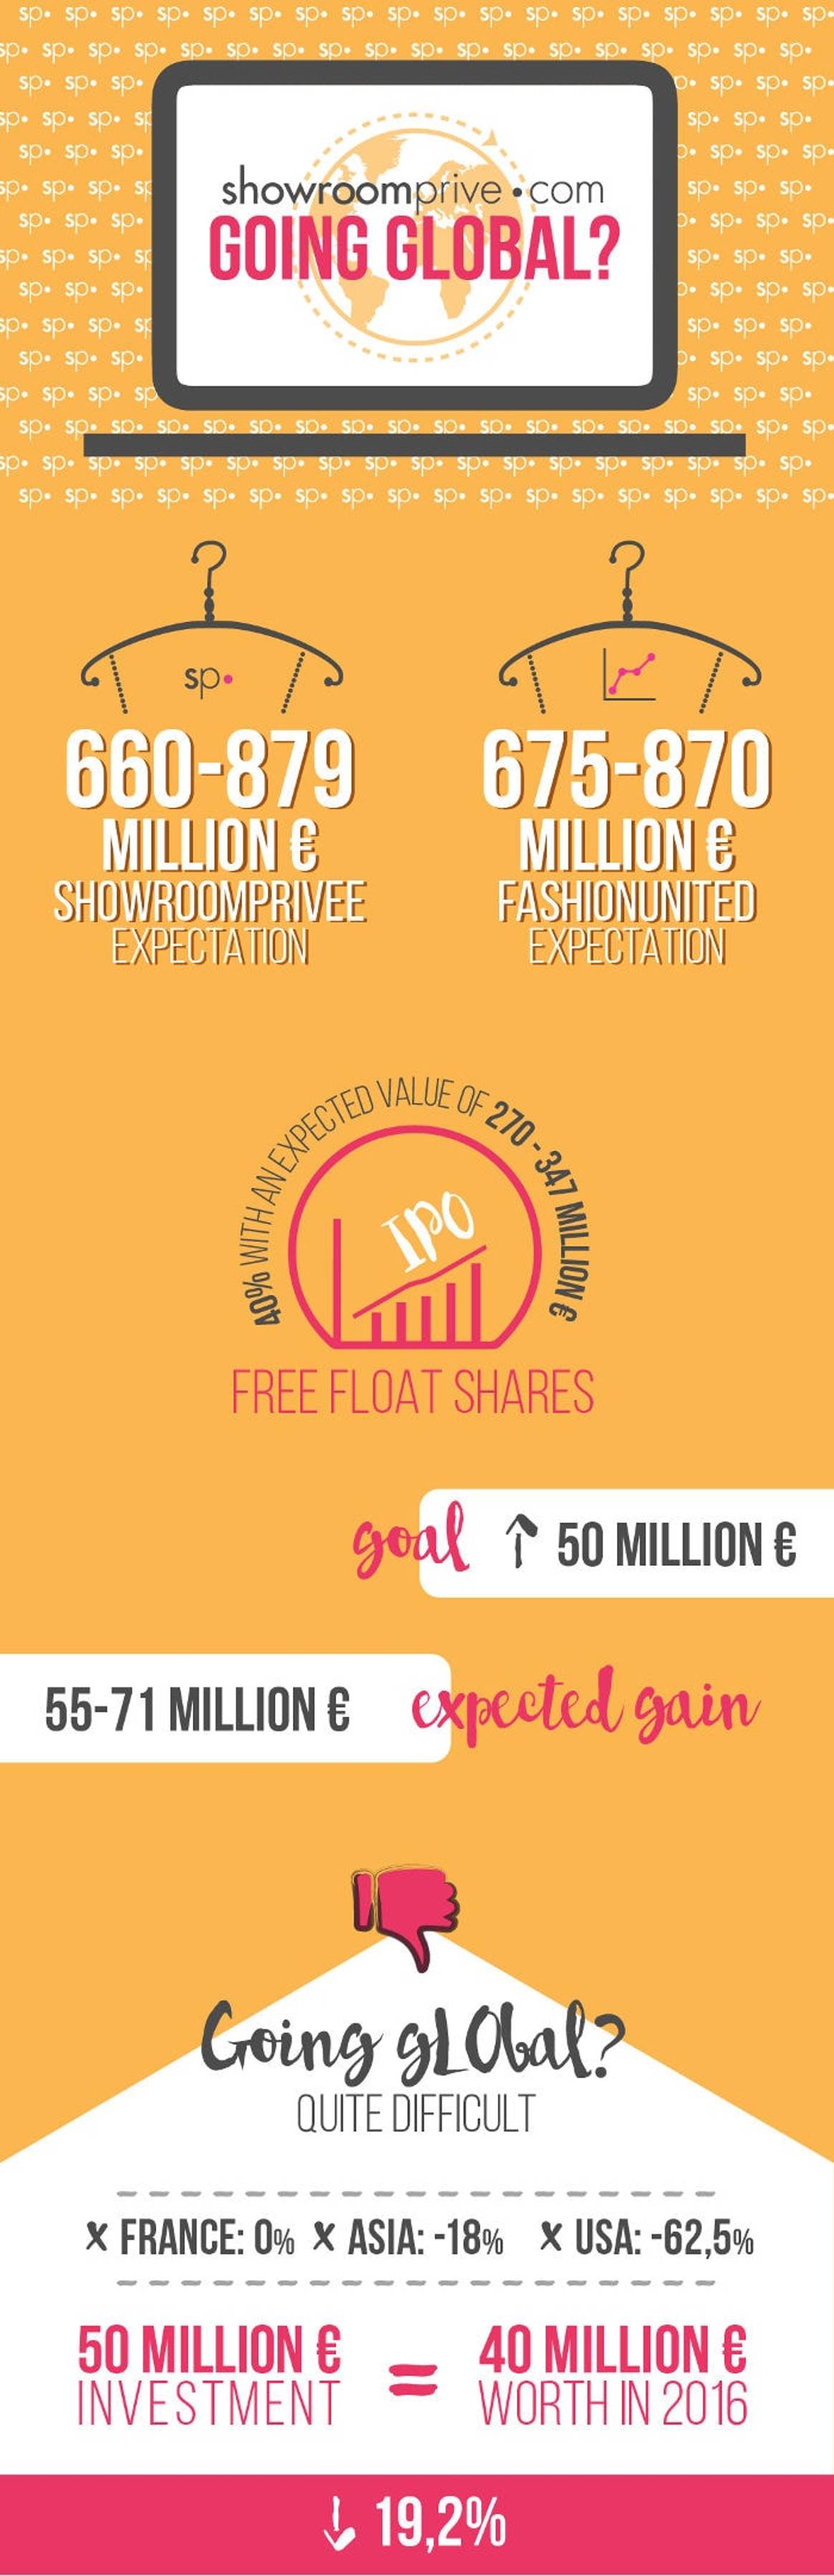 Is Showroomprive.com IPO enough to make it global?